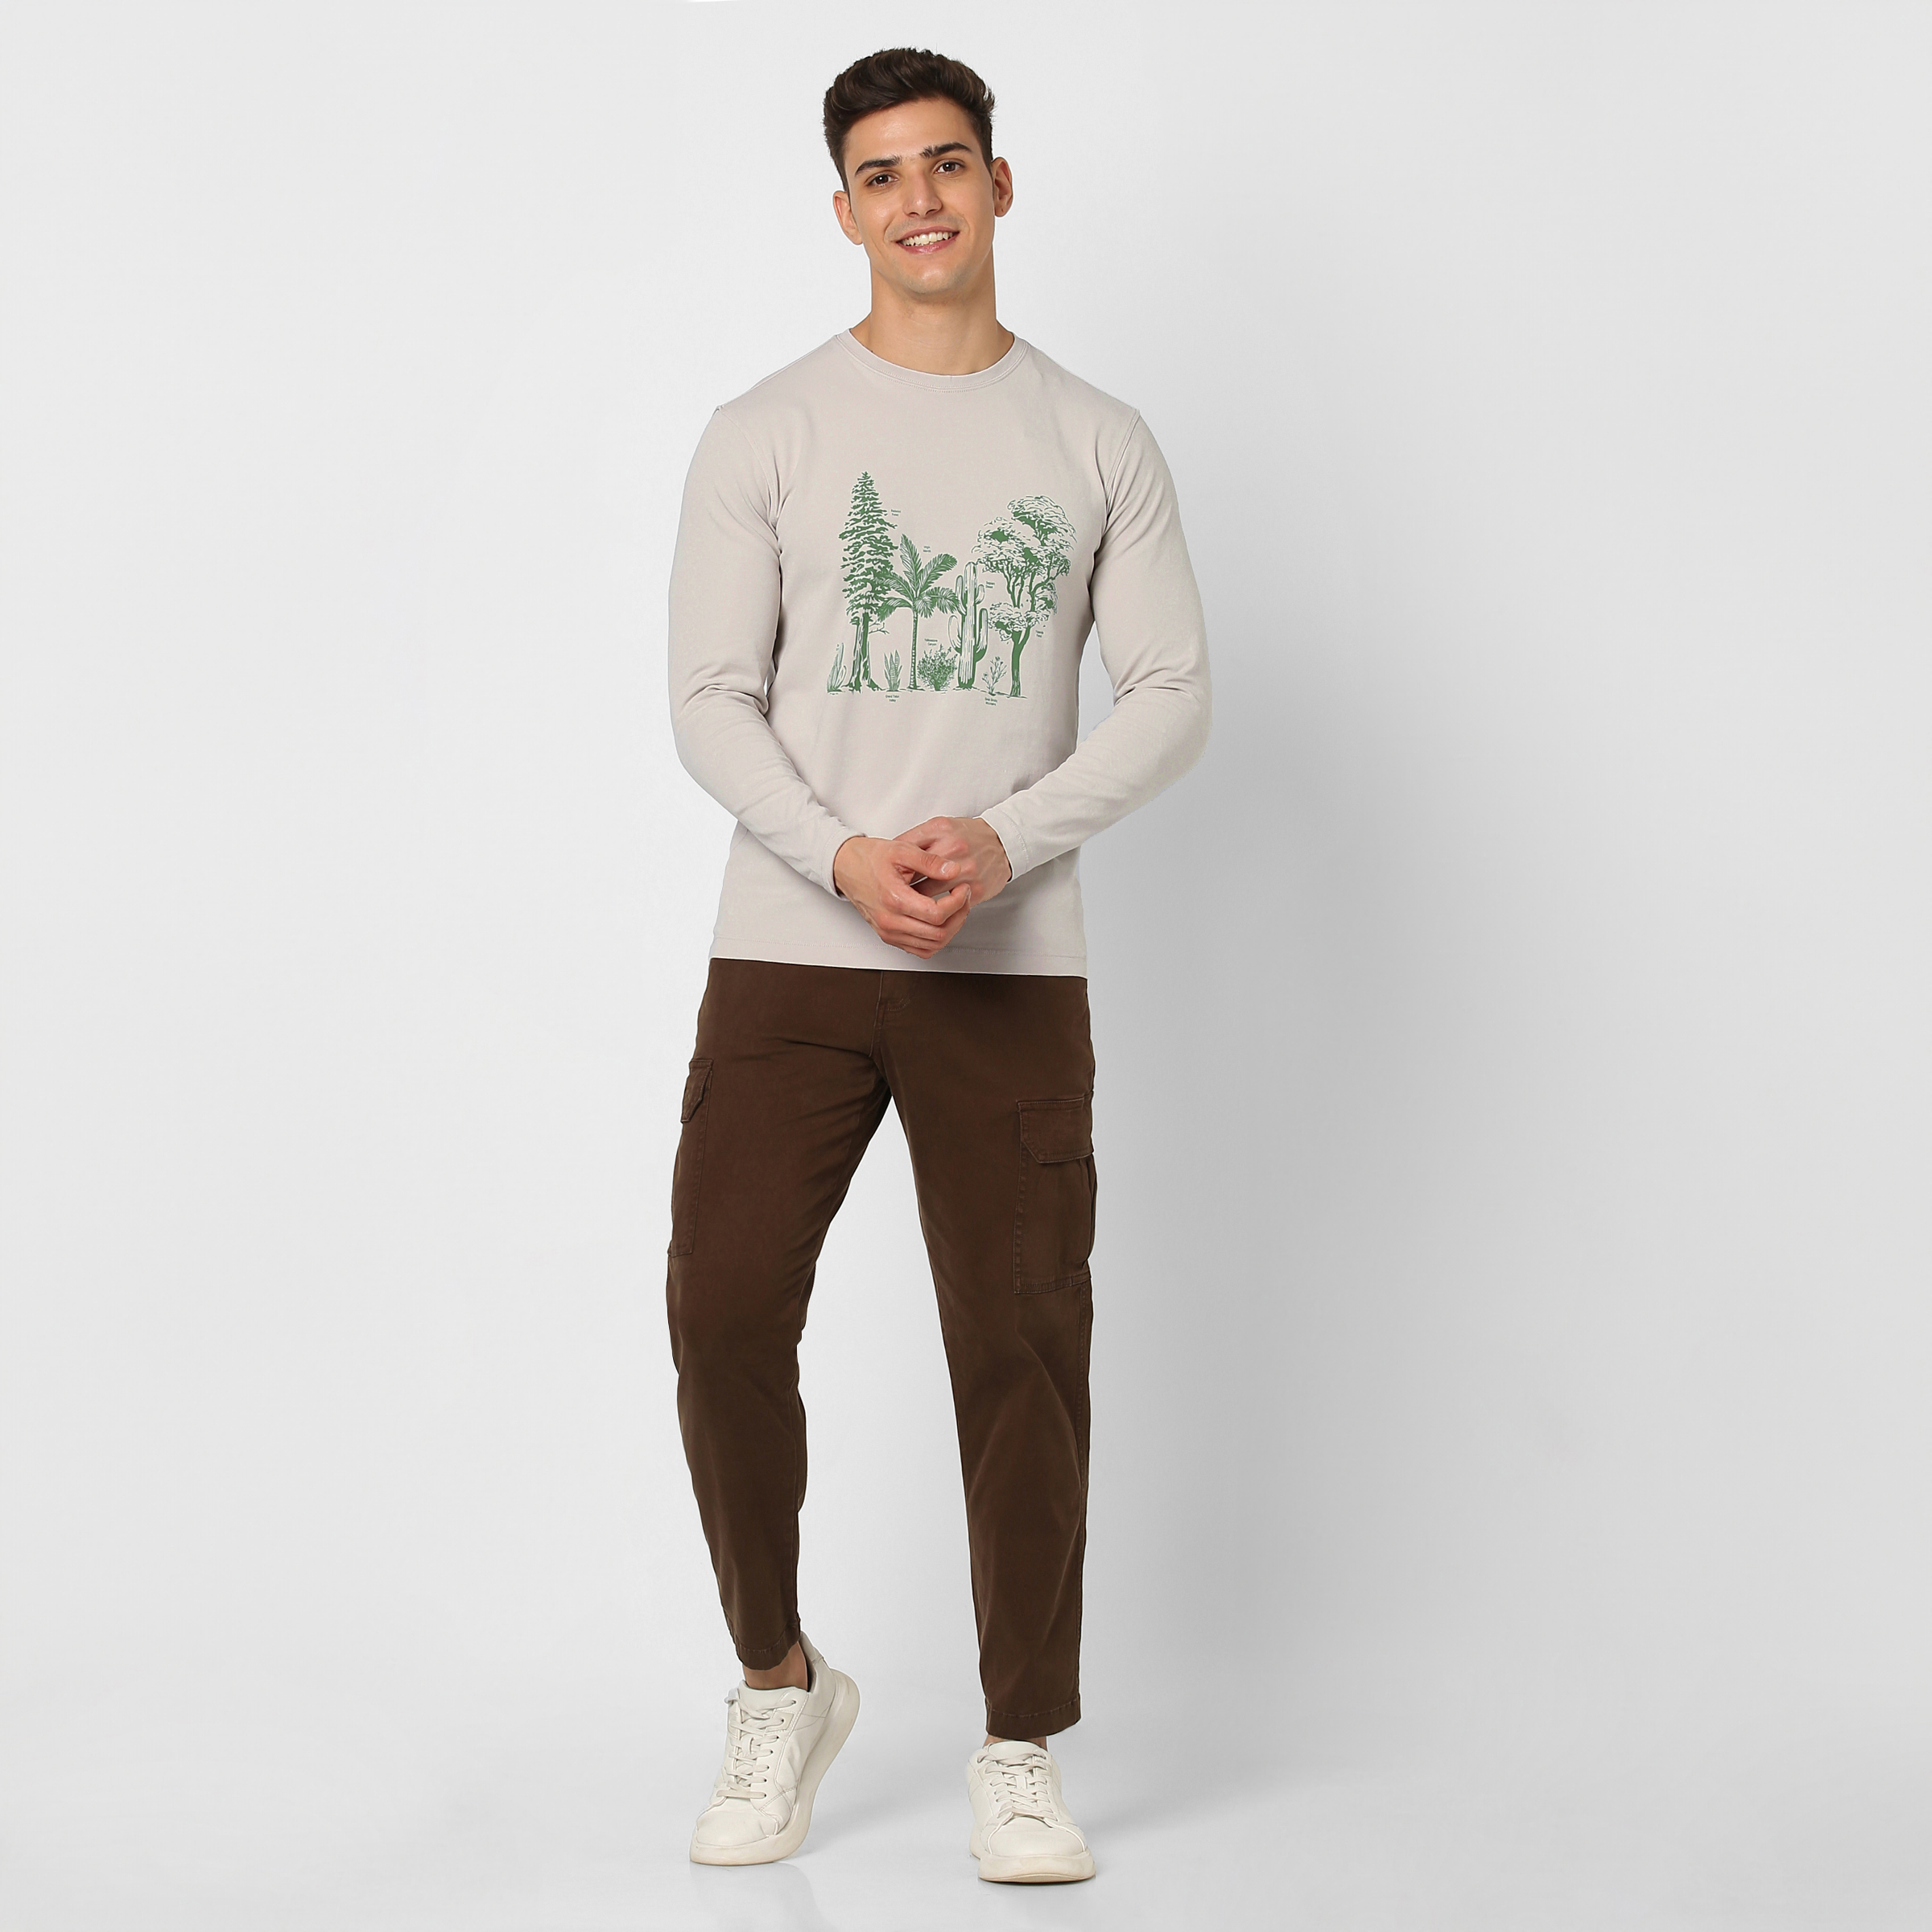 Natural Dye Graphic Long Sleeve - Plants All Over full body on model with green plants graphic